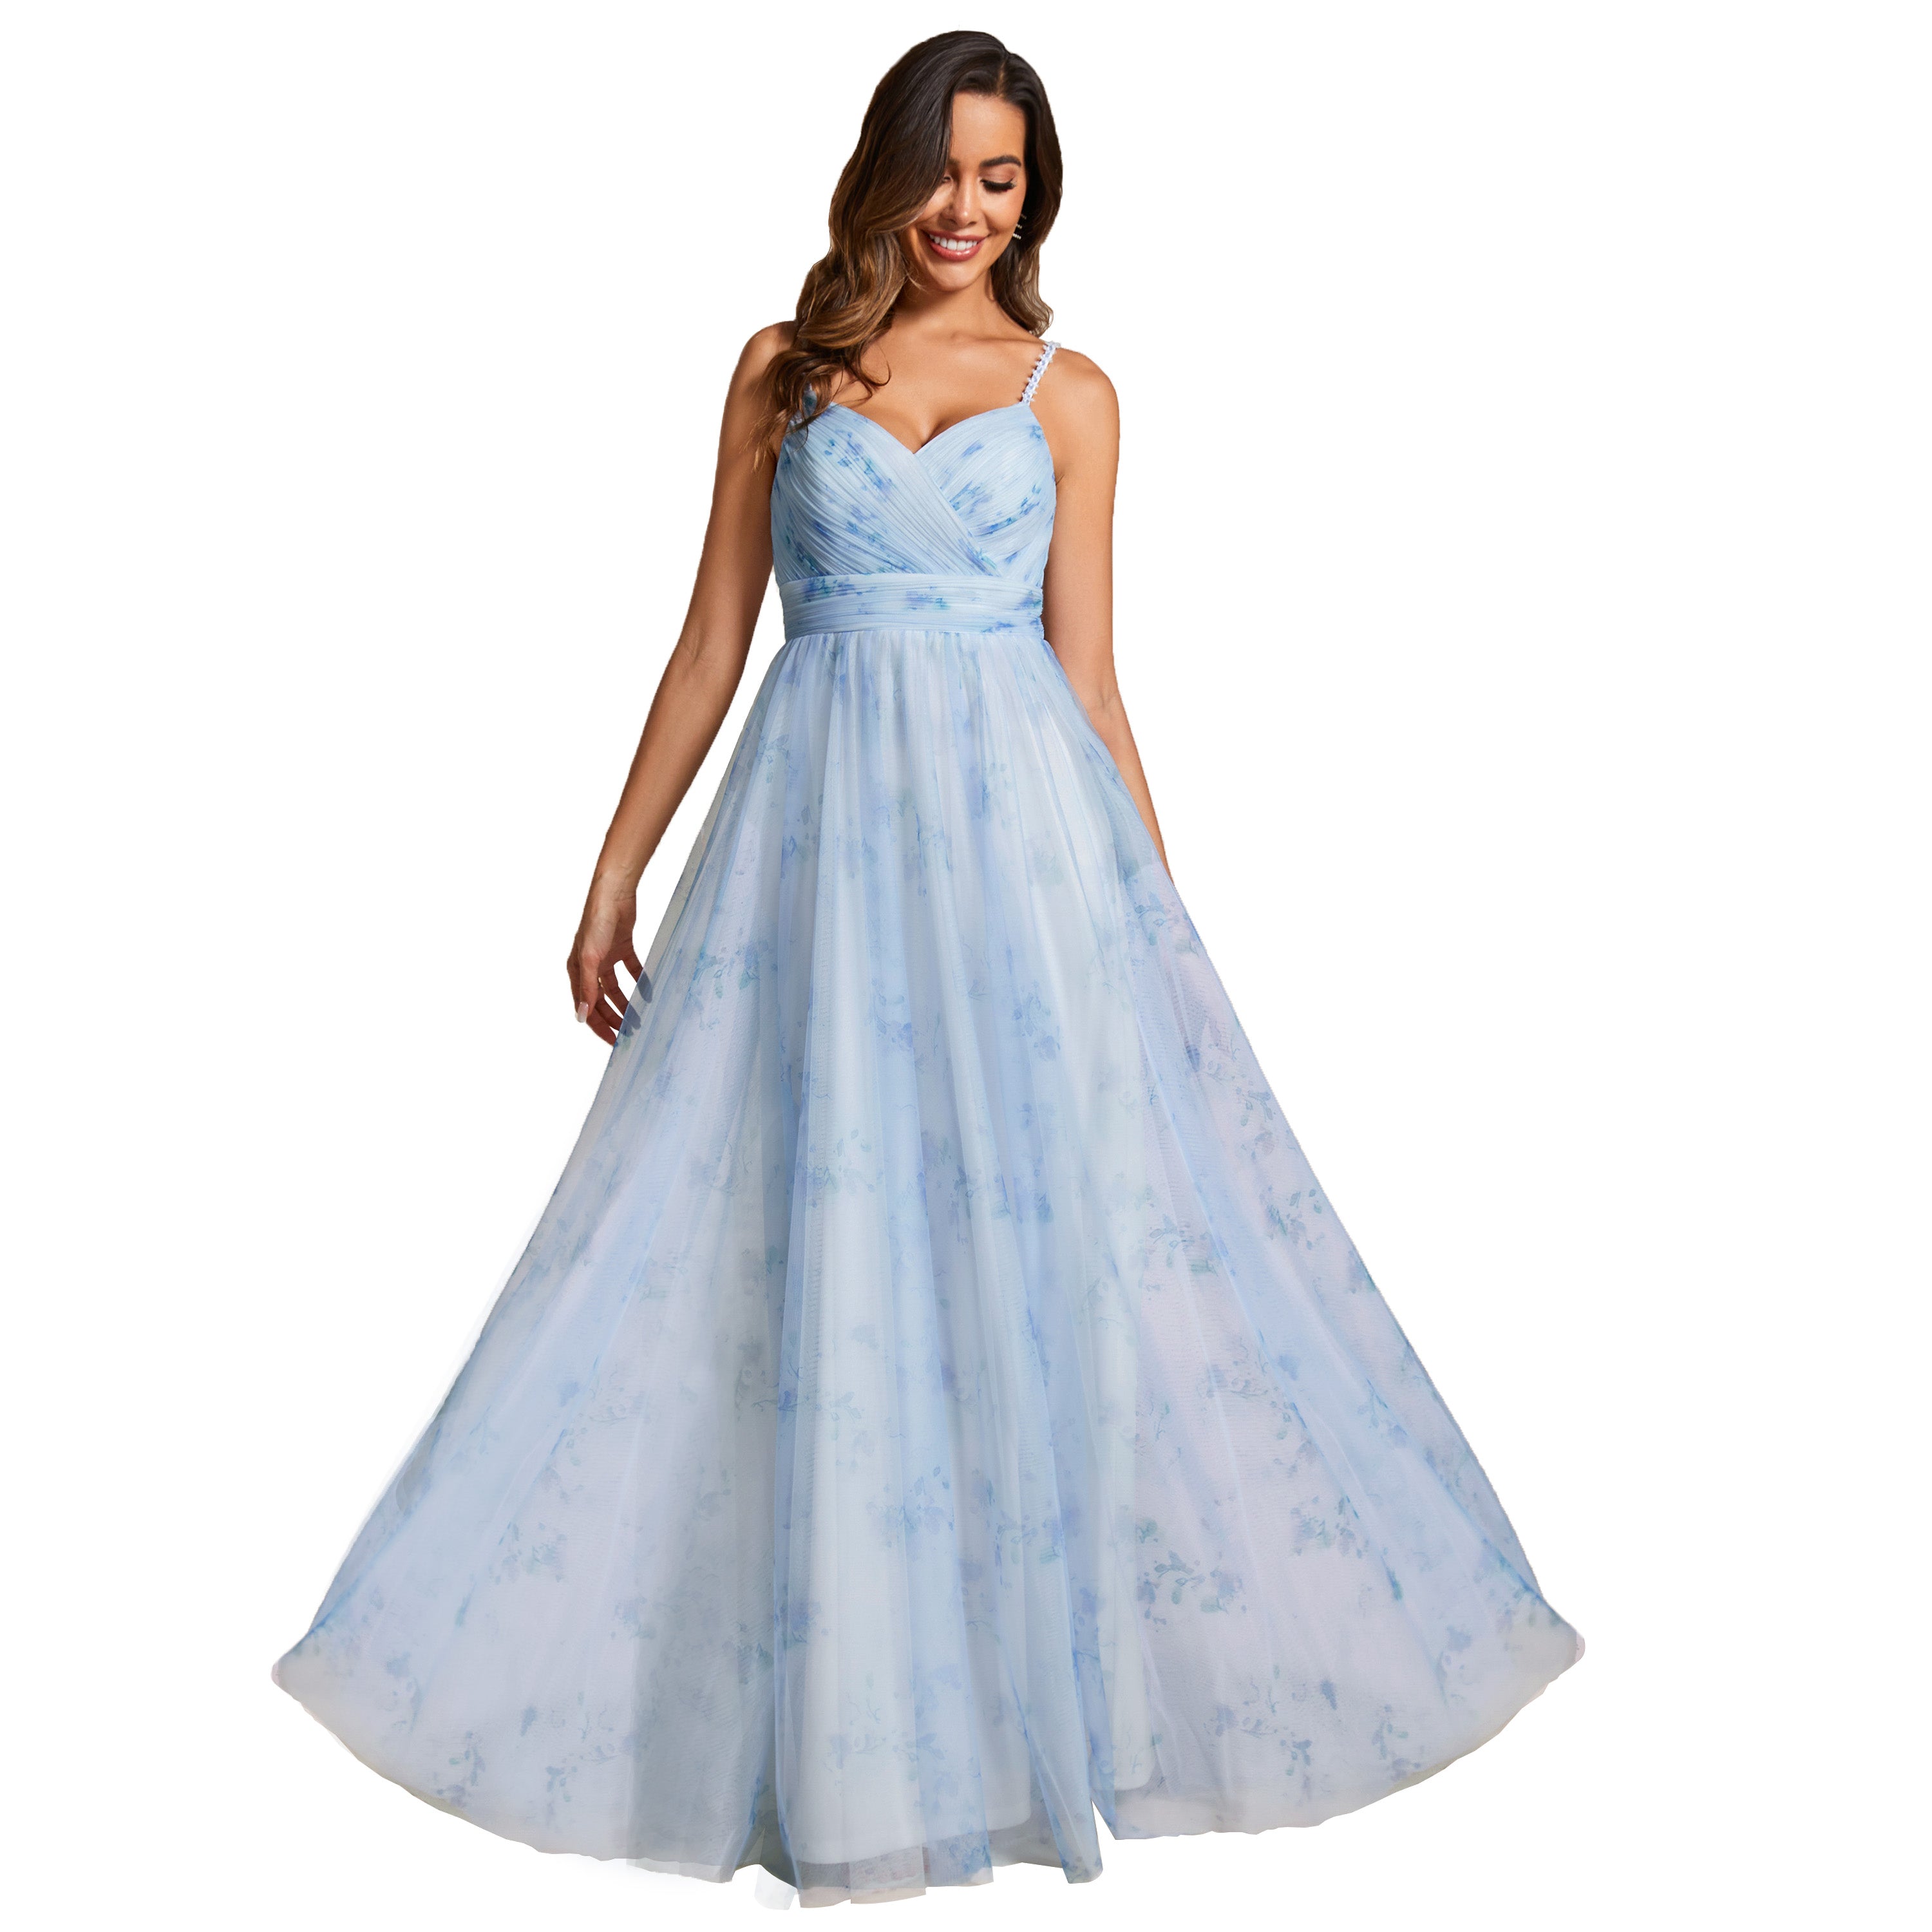 Color=Ice blue | Tulle Floral Printed Spaghetti Strap Evening Dress with V-Neck-Ice blue 5